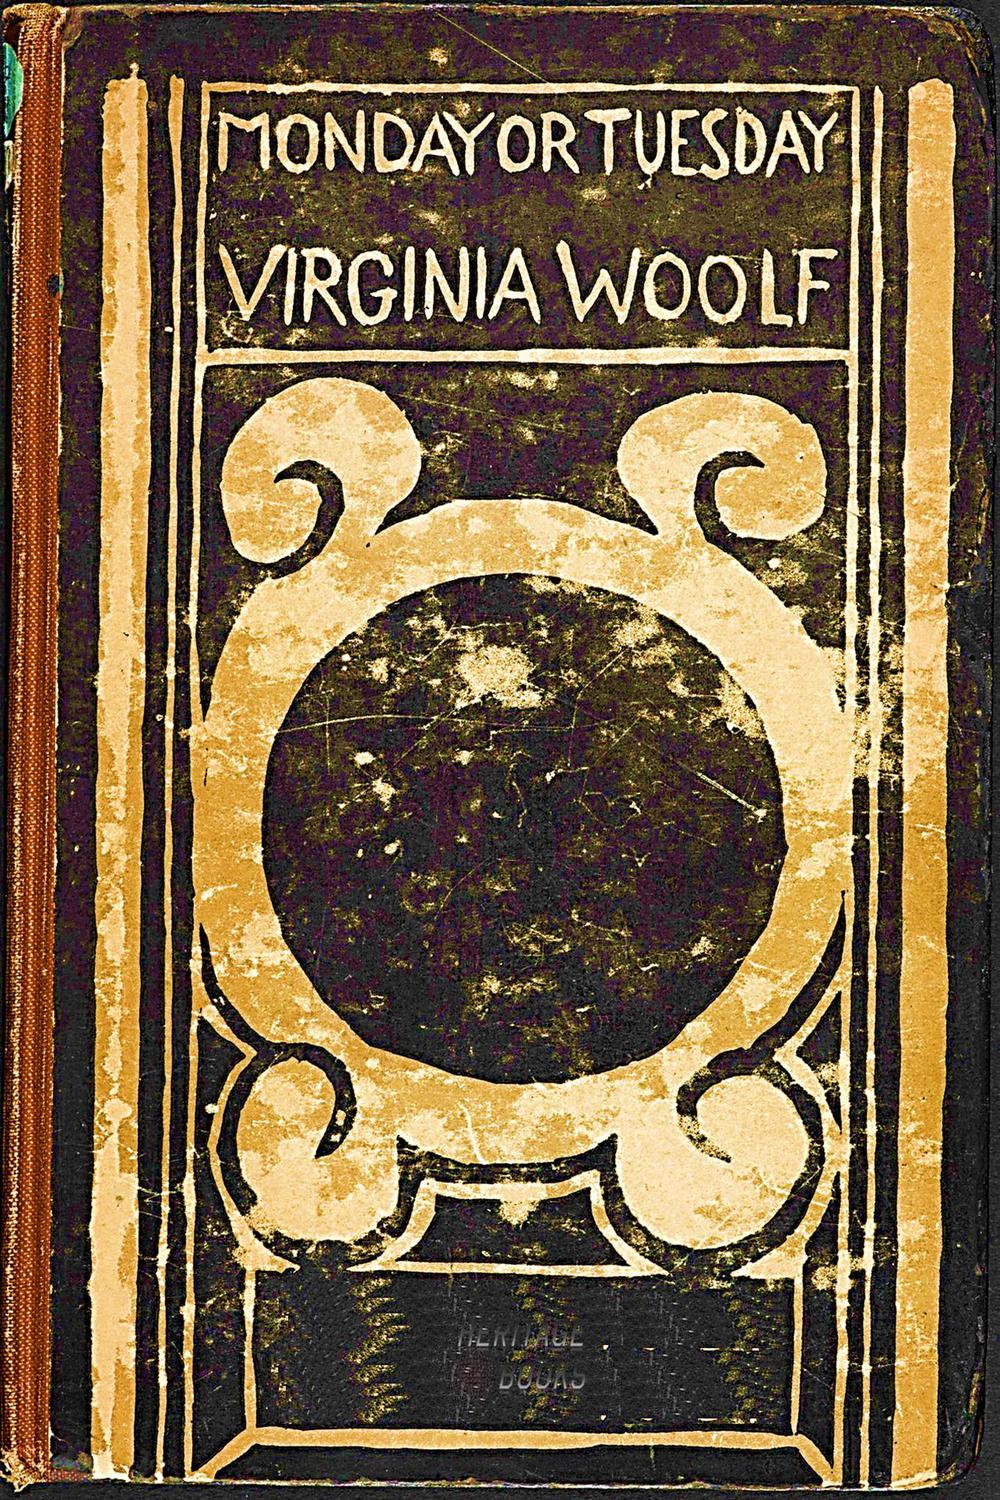 Monday or Tuesday - Virginia Woolf,,